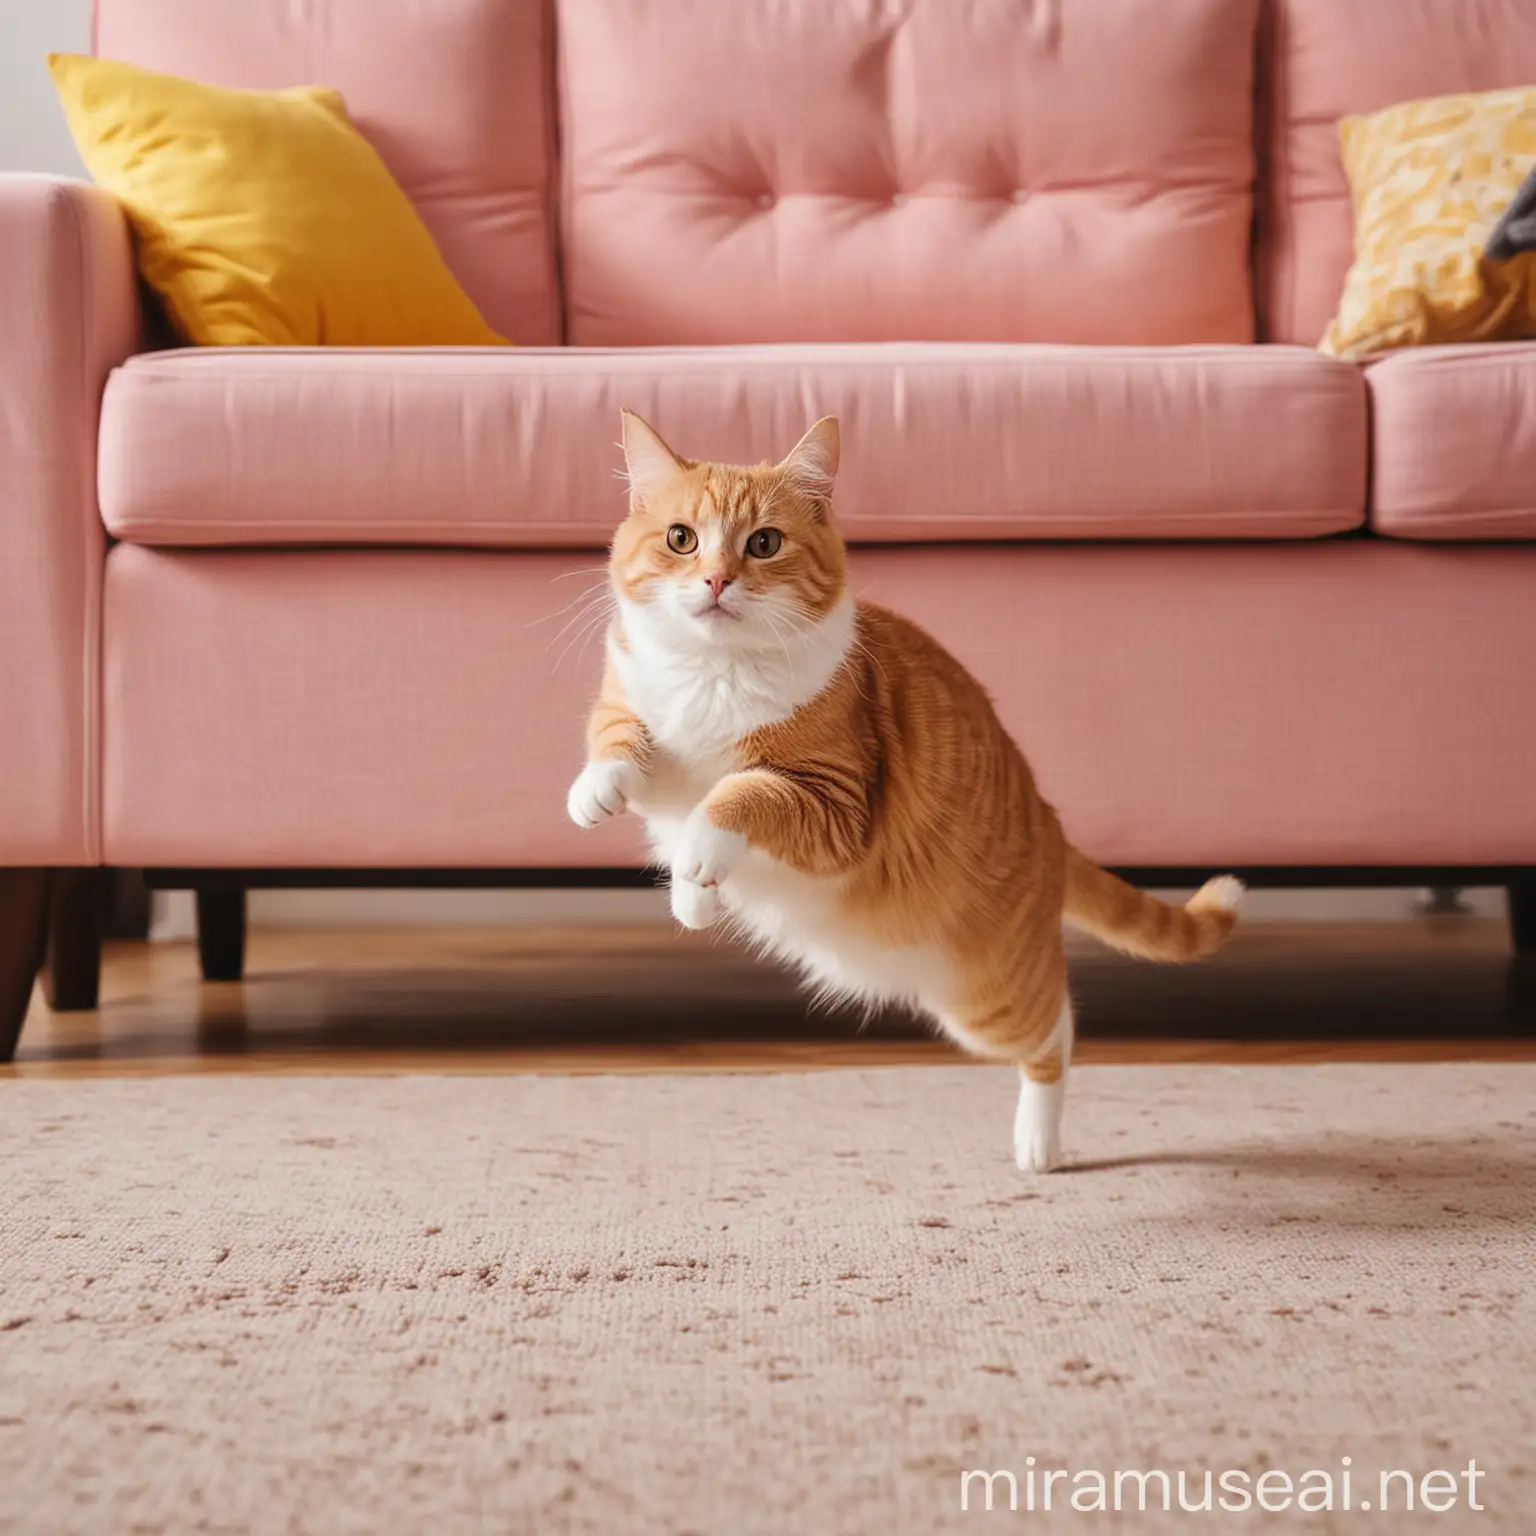 Playful Cat Leaping from Vibrant Couch to Sunny Floor